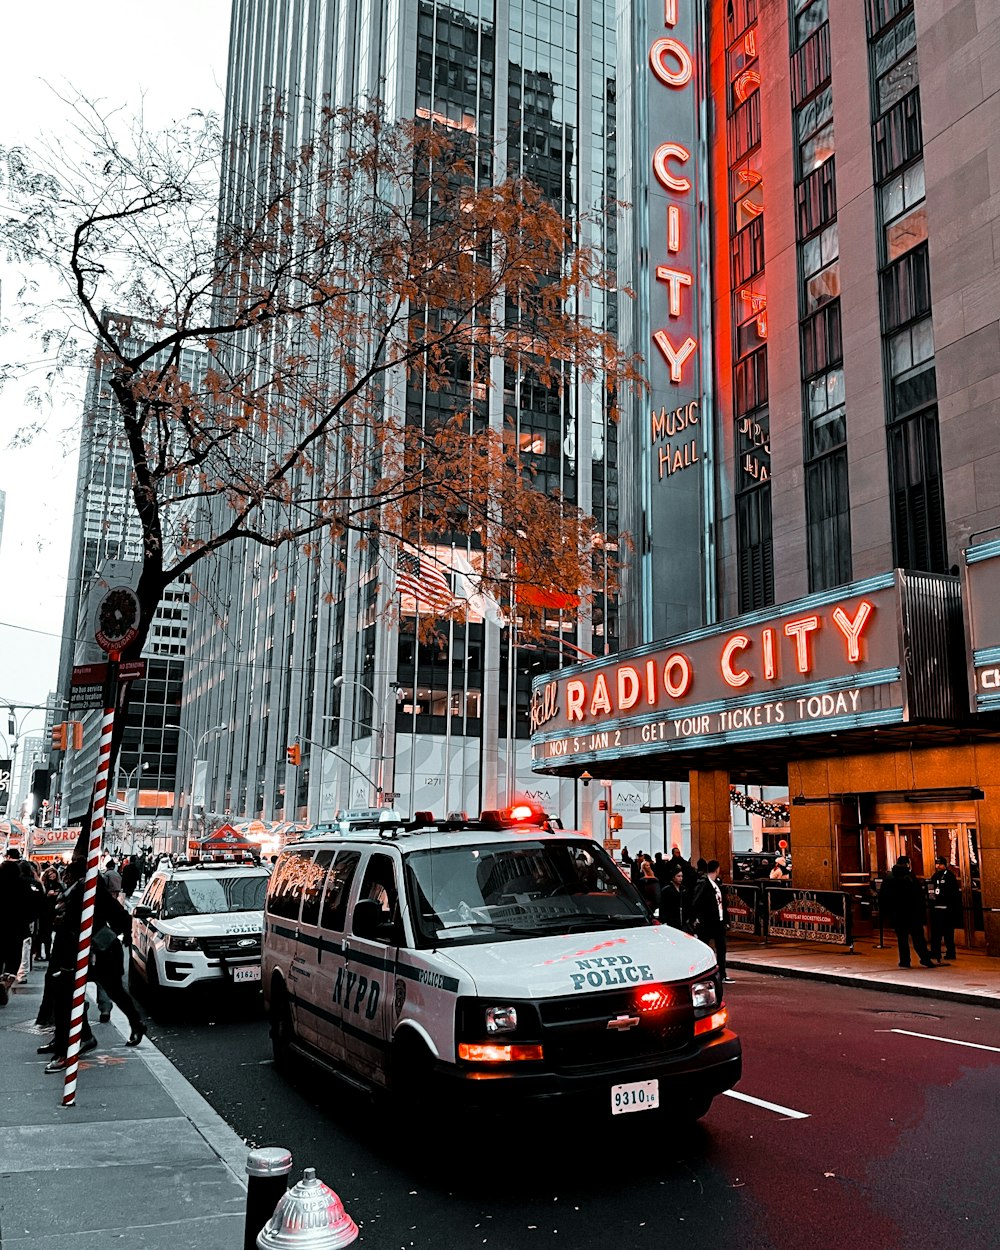 a police car parked in front of a radio city building